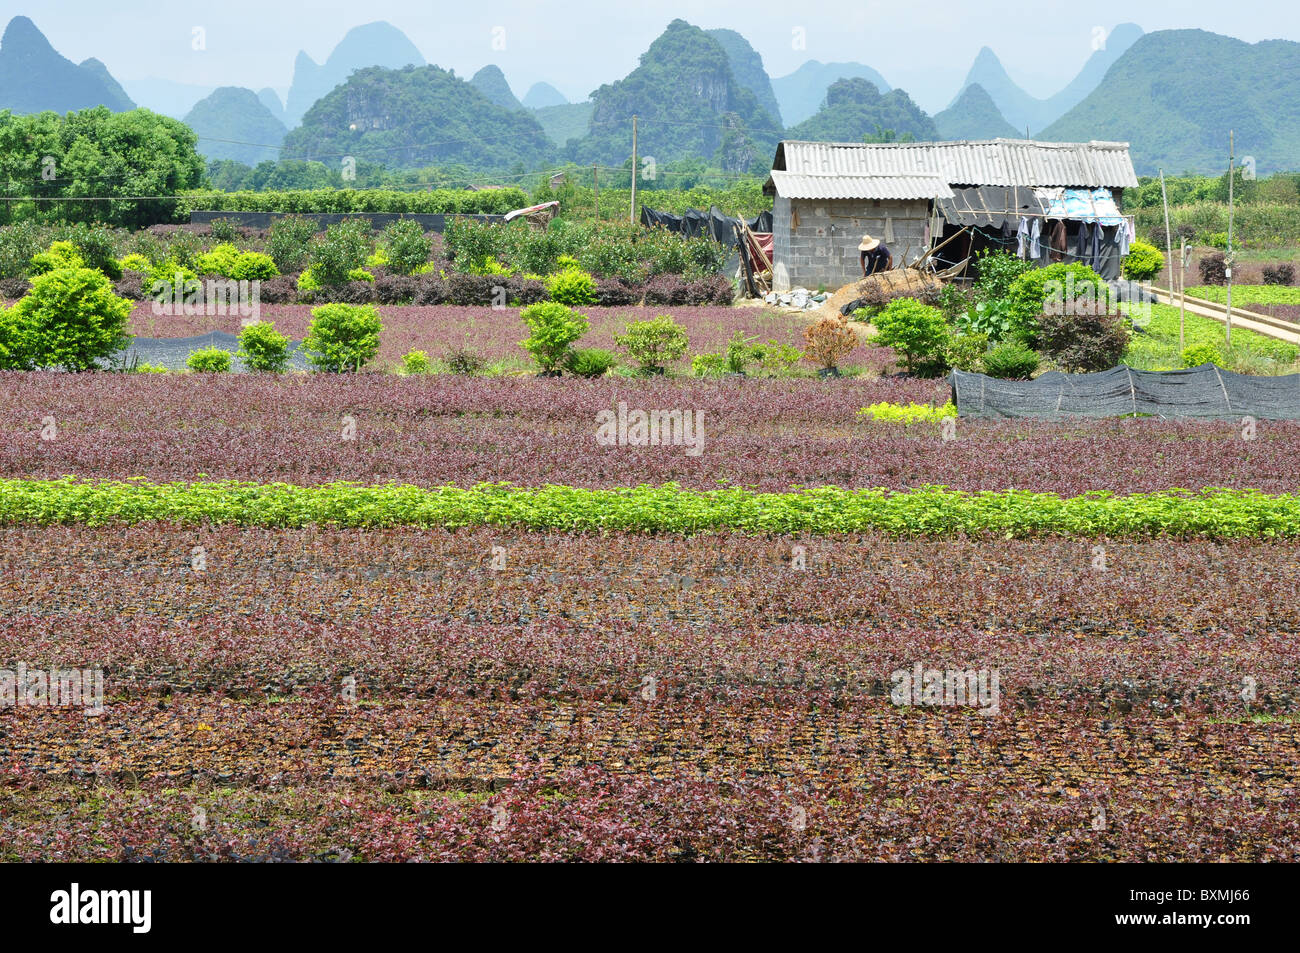 Karst hills framing the fields in the Guilin area makes a lovely scenery. Southern China Stock Photo